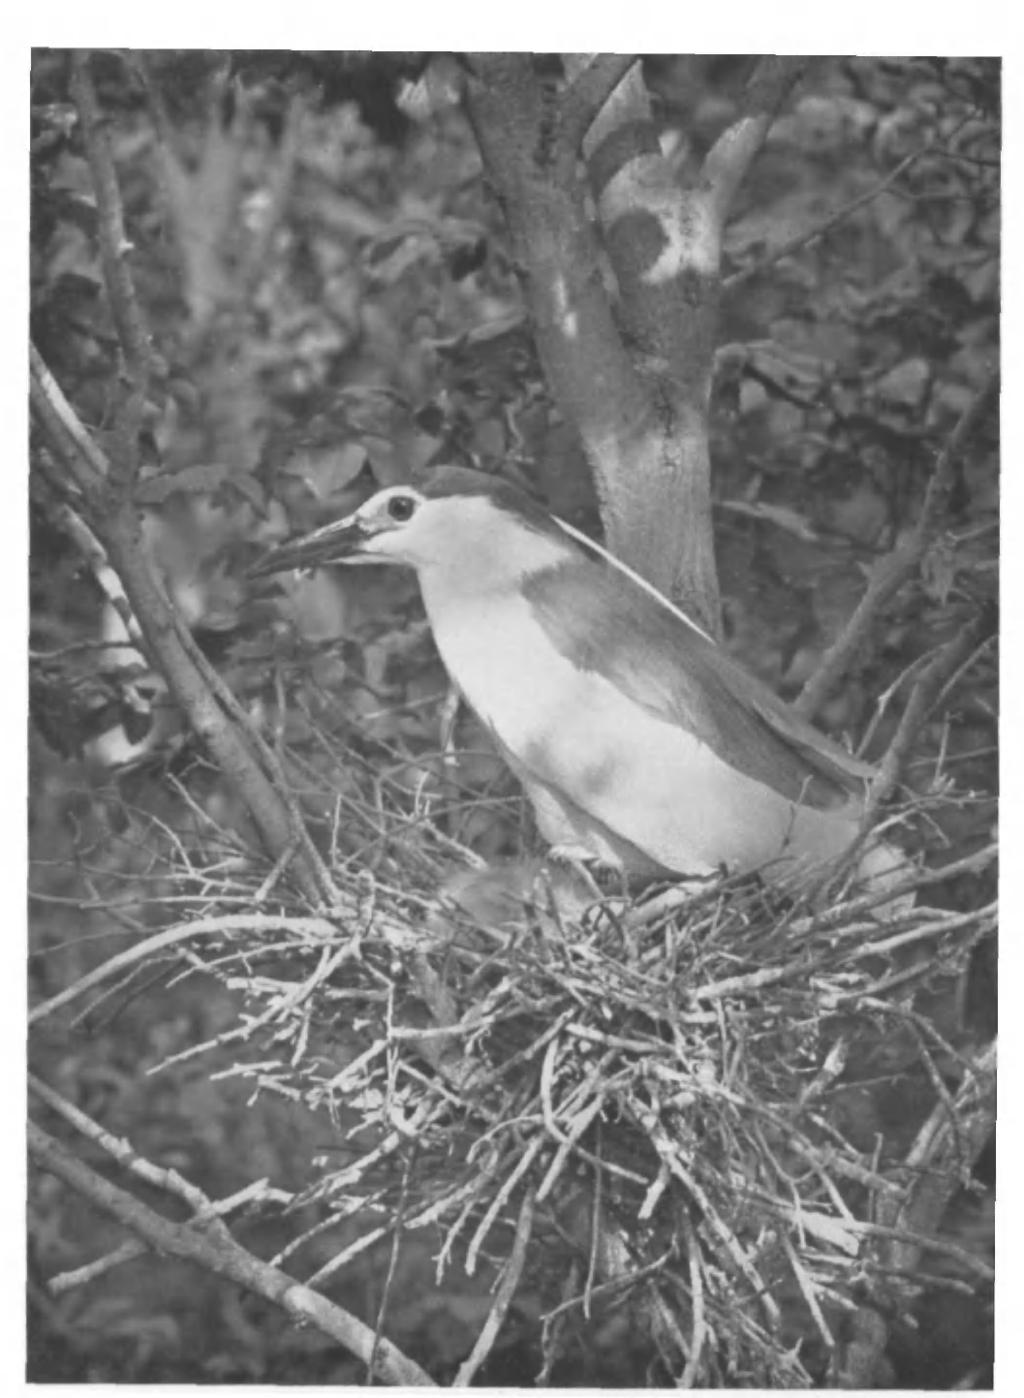 British Birds, Vol. xlvii, PI. 54. ADULT AT NEST WITH YOUNG. CAMARGUE, SOUTH FRANCE. APRIL, 1958. (Photographed by G. K. YEATES).